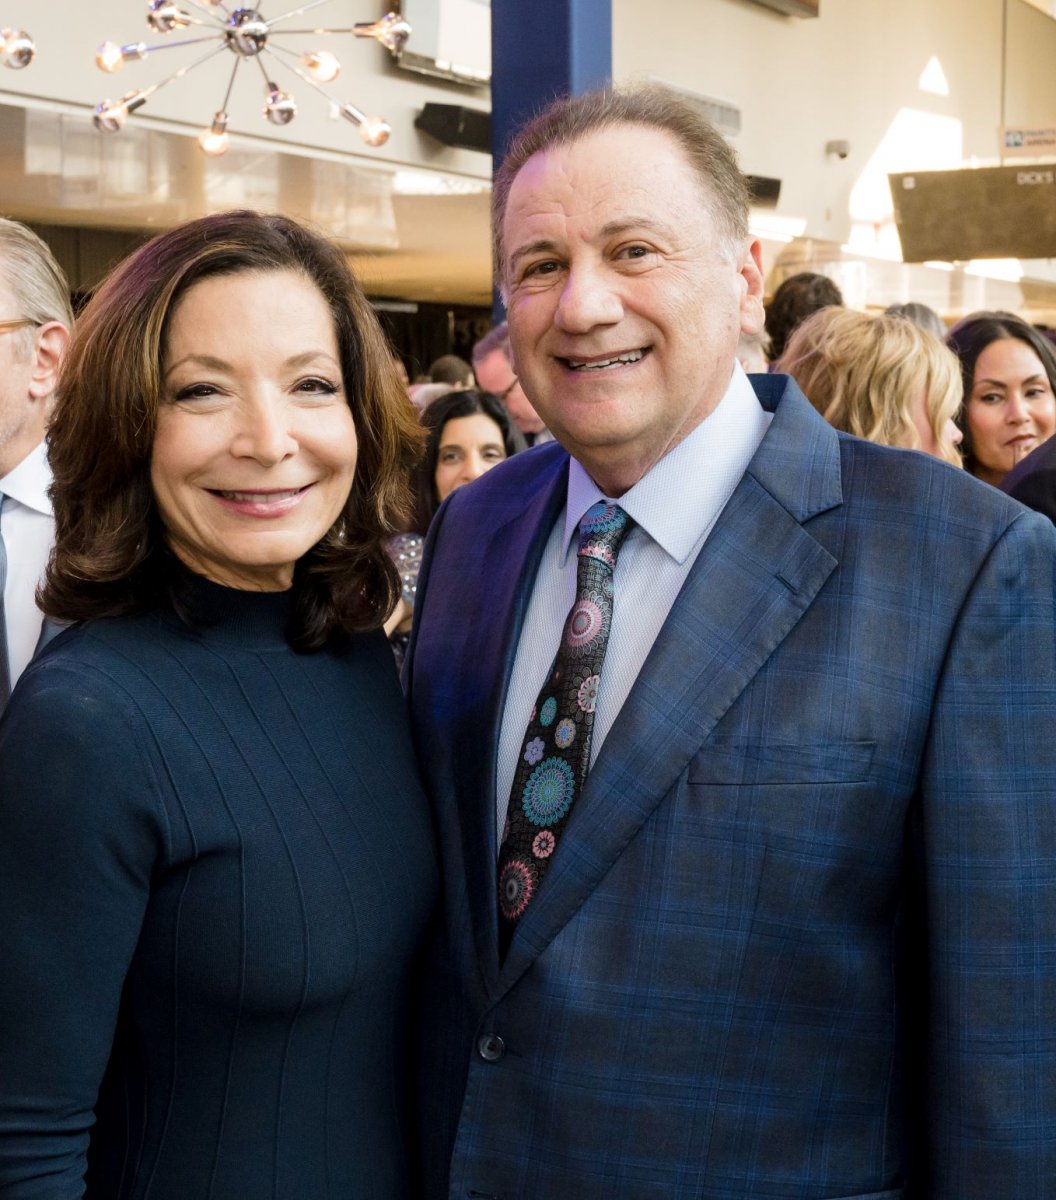 UPMC President and Chief Executive Officer Leslie Davis is pictured with her husband Abe Leizerowski.